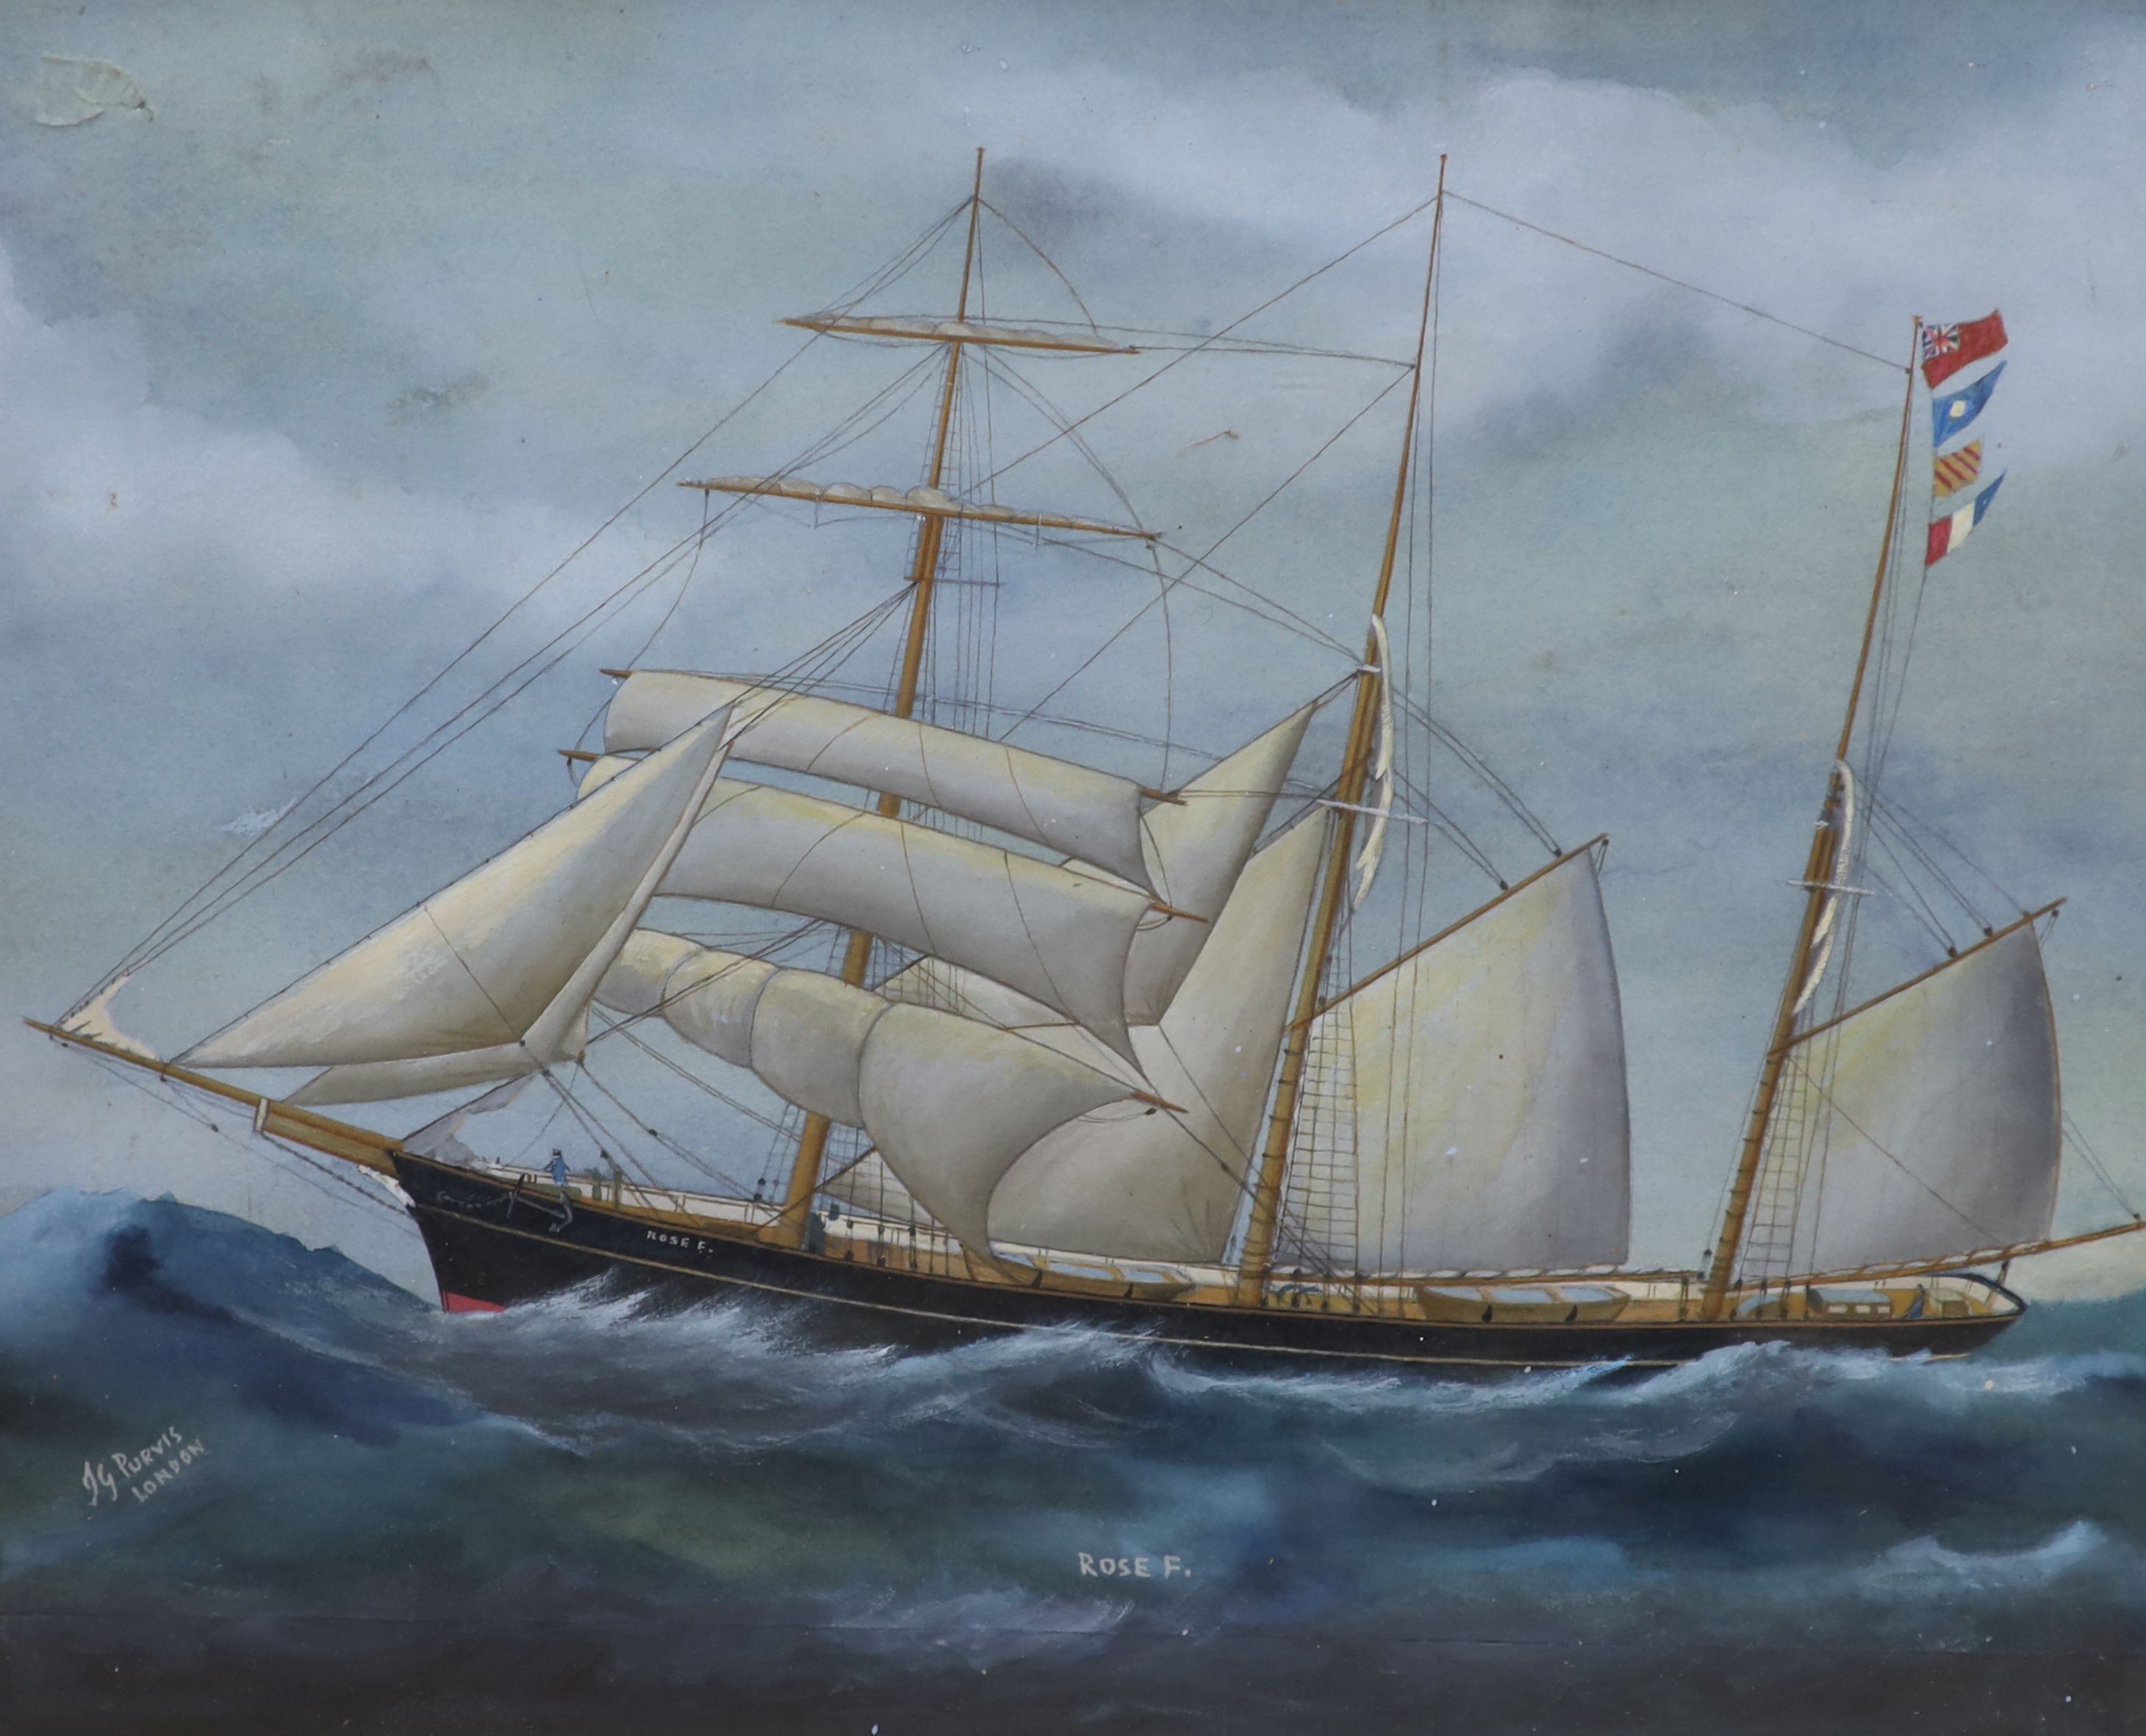 T.G Purvis, watercolour and gouache, The Barquetine Rose F, signed, 38 x 46cm